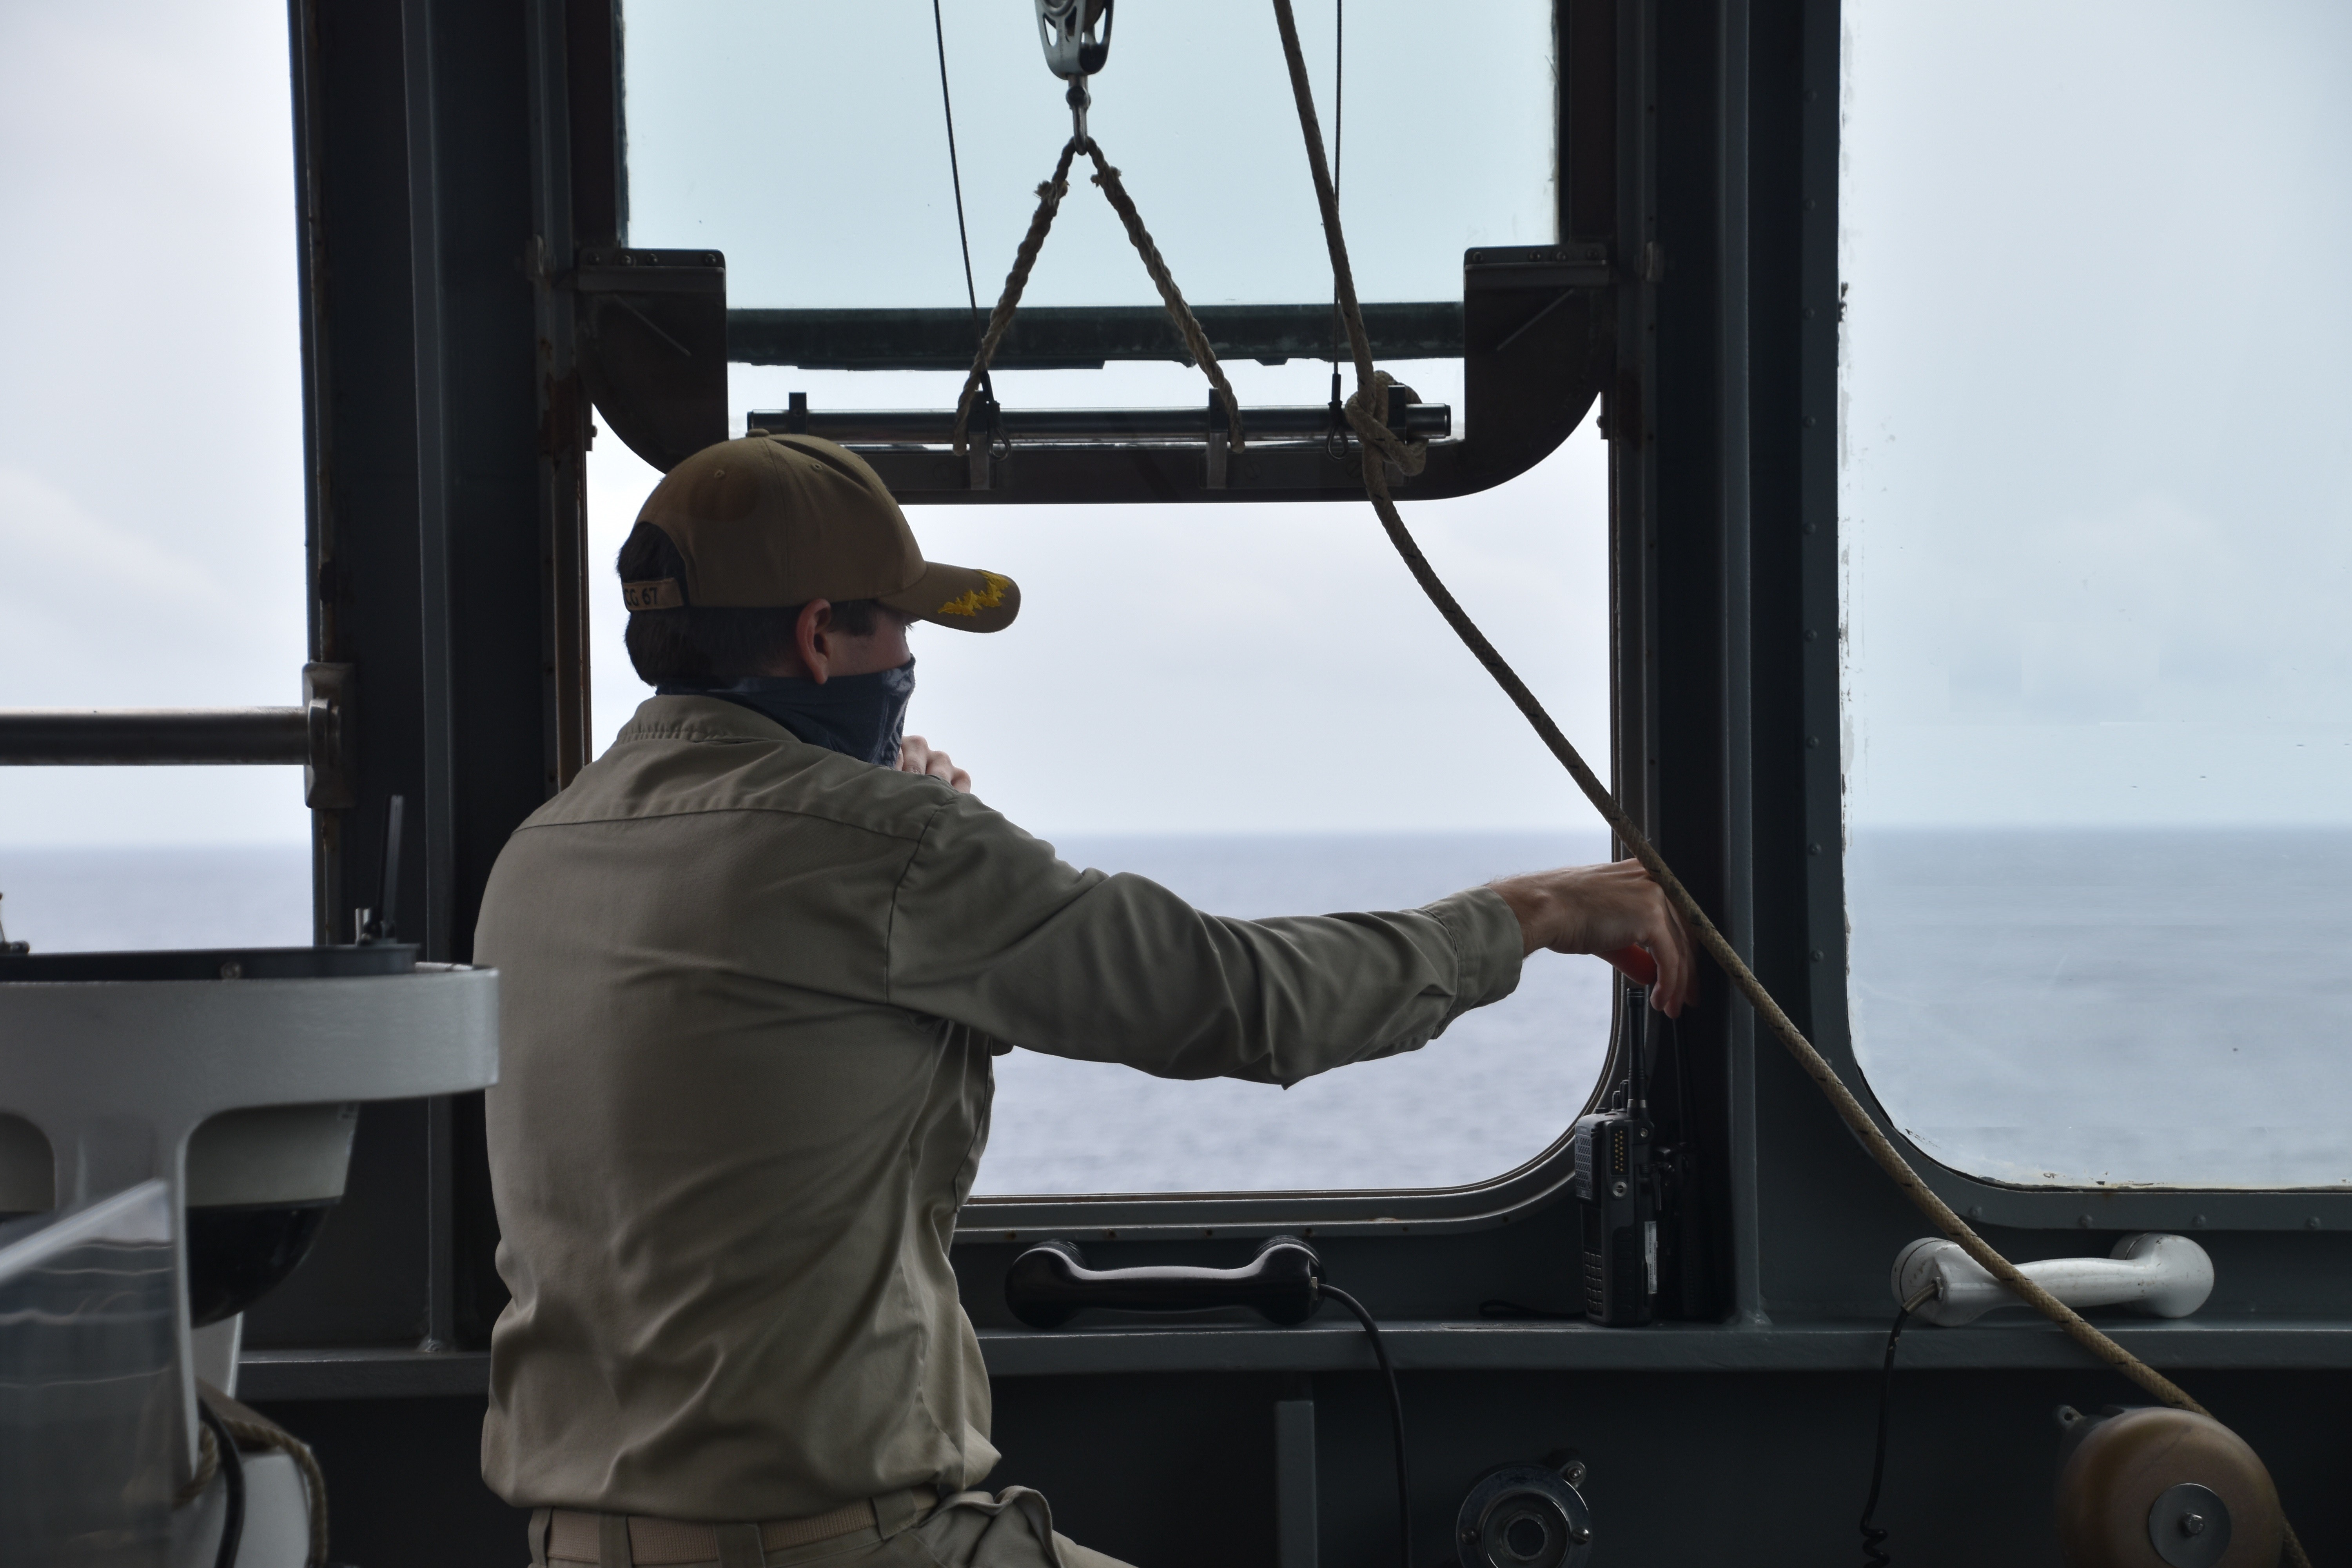 Capt. Daniel Wiseman, master of USNS Amelia Earhart (T-AKE 6), watches as his dry cargo/ammunition ship conducts a replenishment at sea with HMAS Ballarat (FFH 155), an Anzac-class frigate in the Royal Australian Navy.